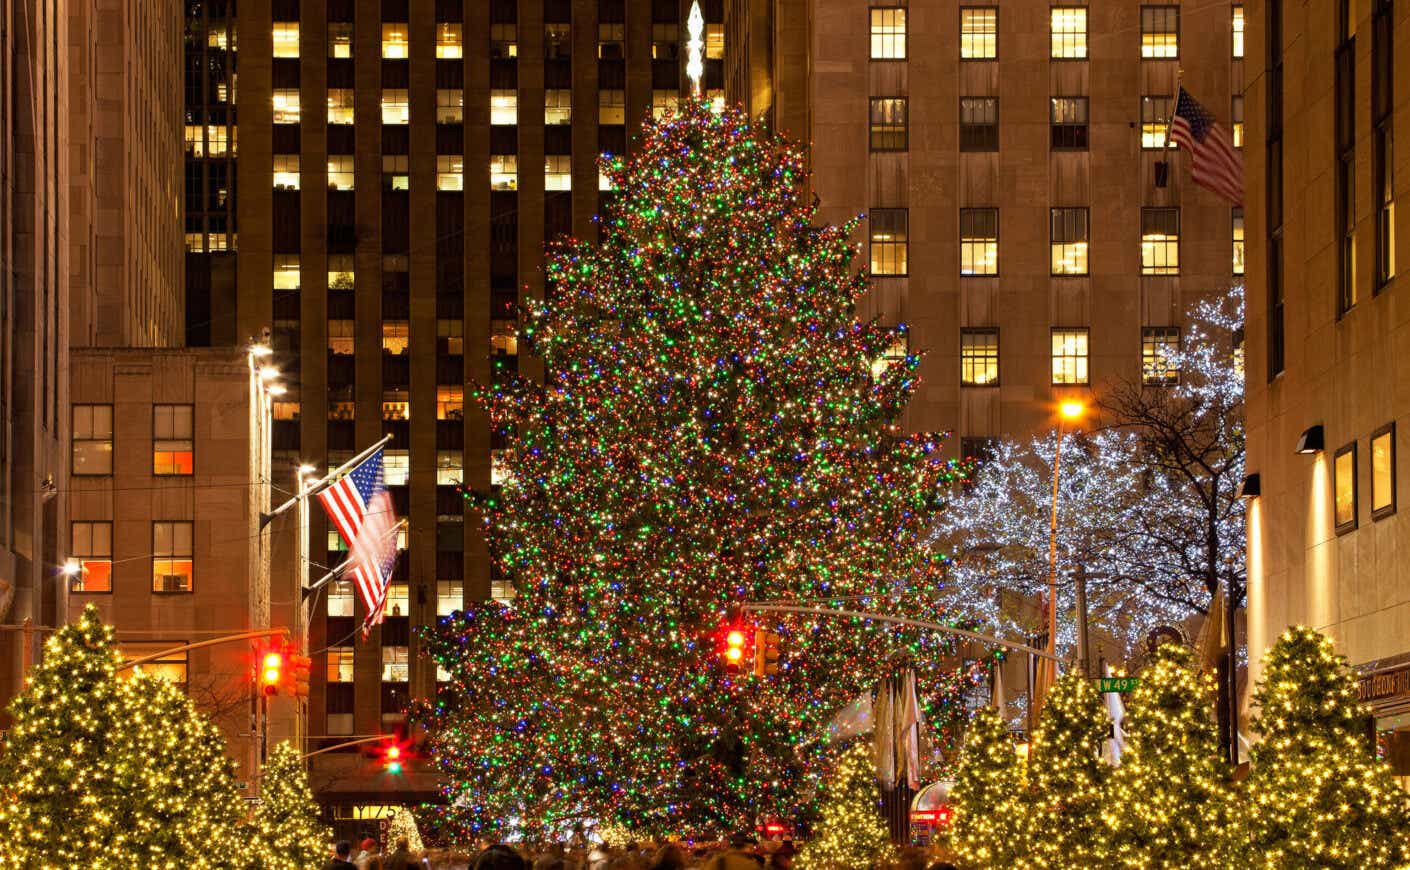 A big Christmas tree is pictured.